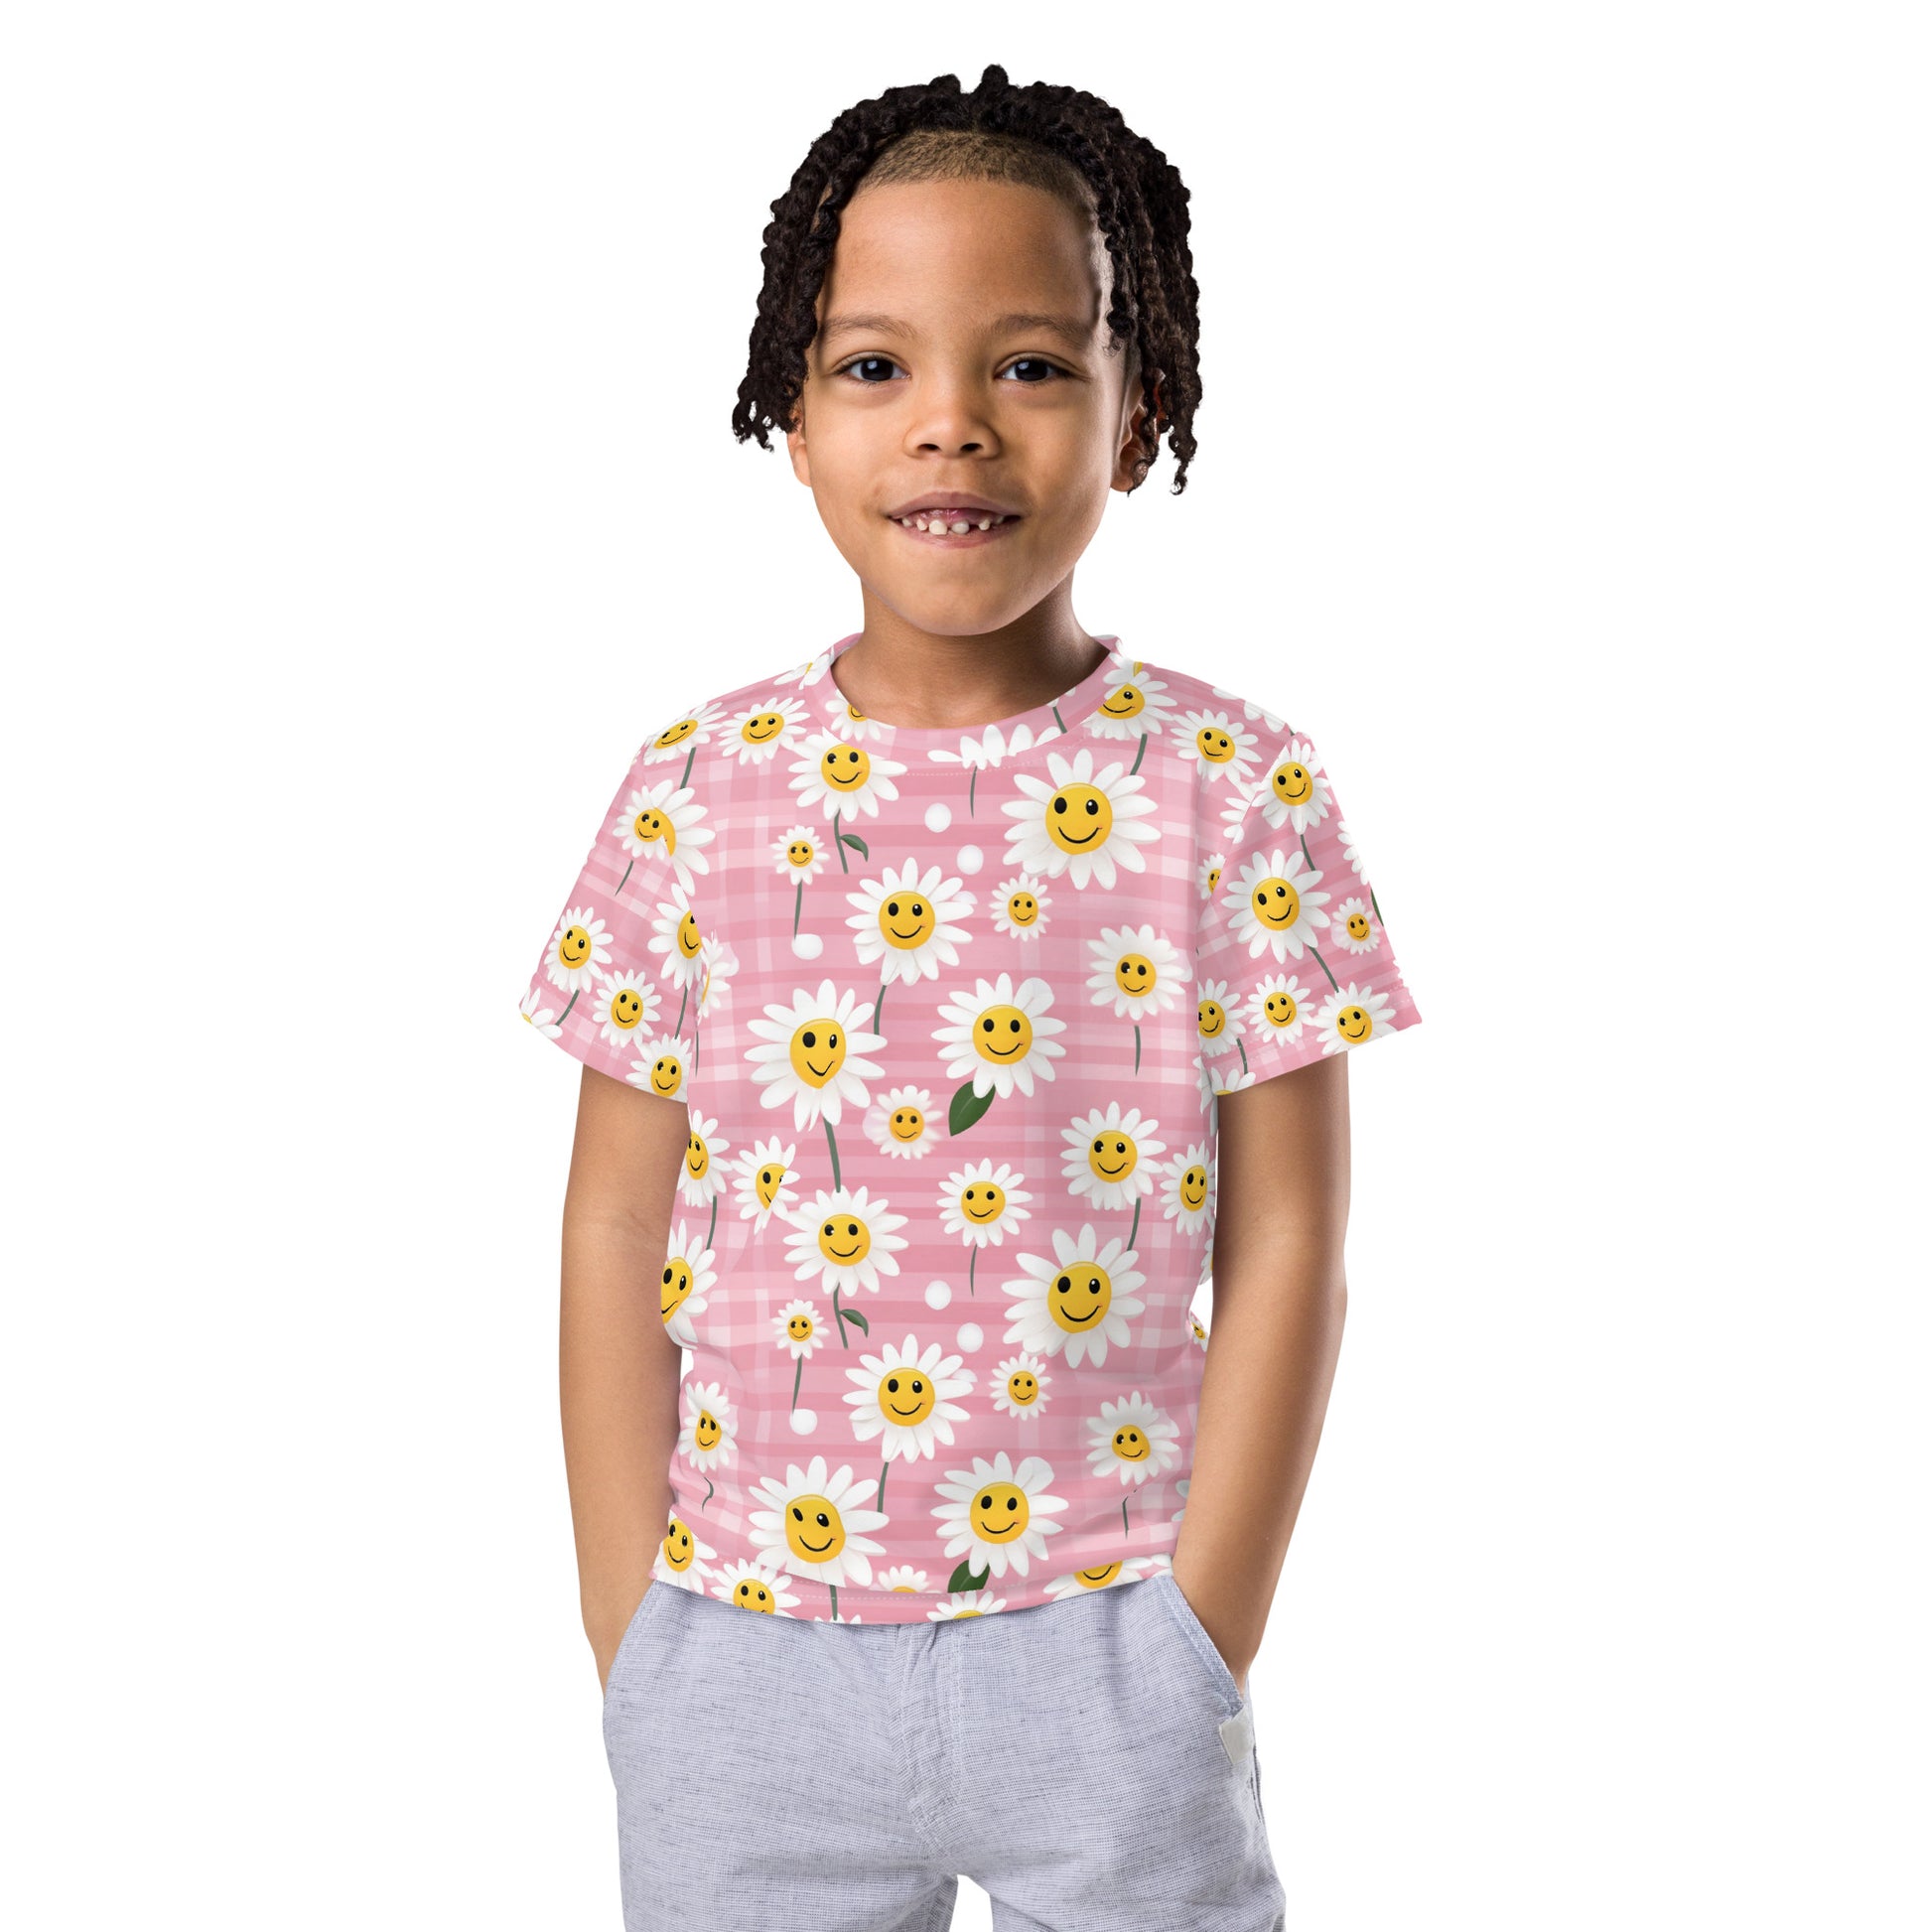 Happy Daisy Kids Tshirt (2T-7), Cute Face Pink Smiling Flowers Floral Toddler Graphic Girls Boys Aesthetic Crewneck Tee Top Gift Shirt Starcove Fashion